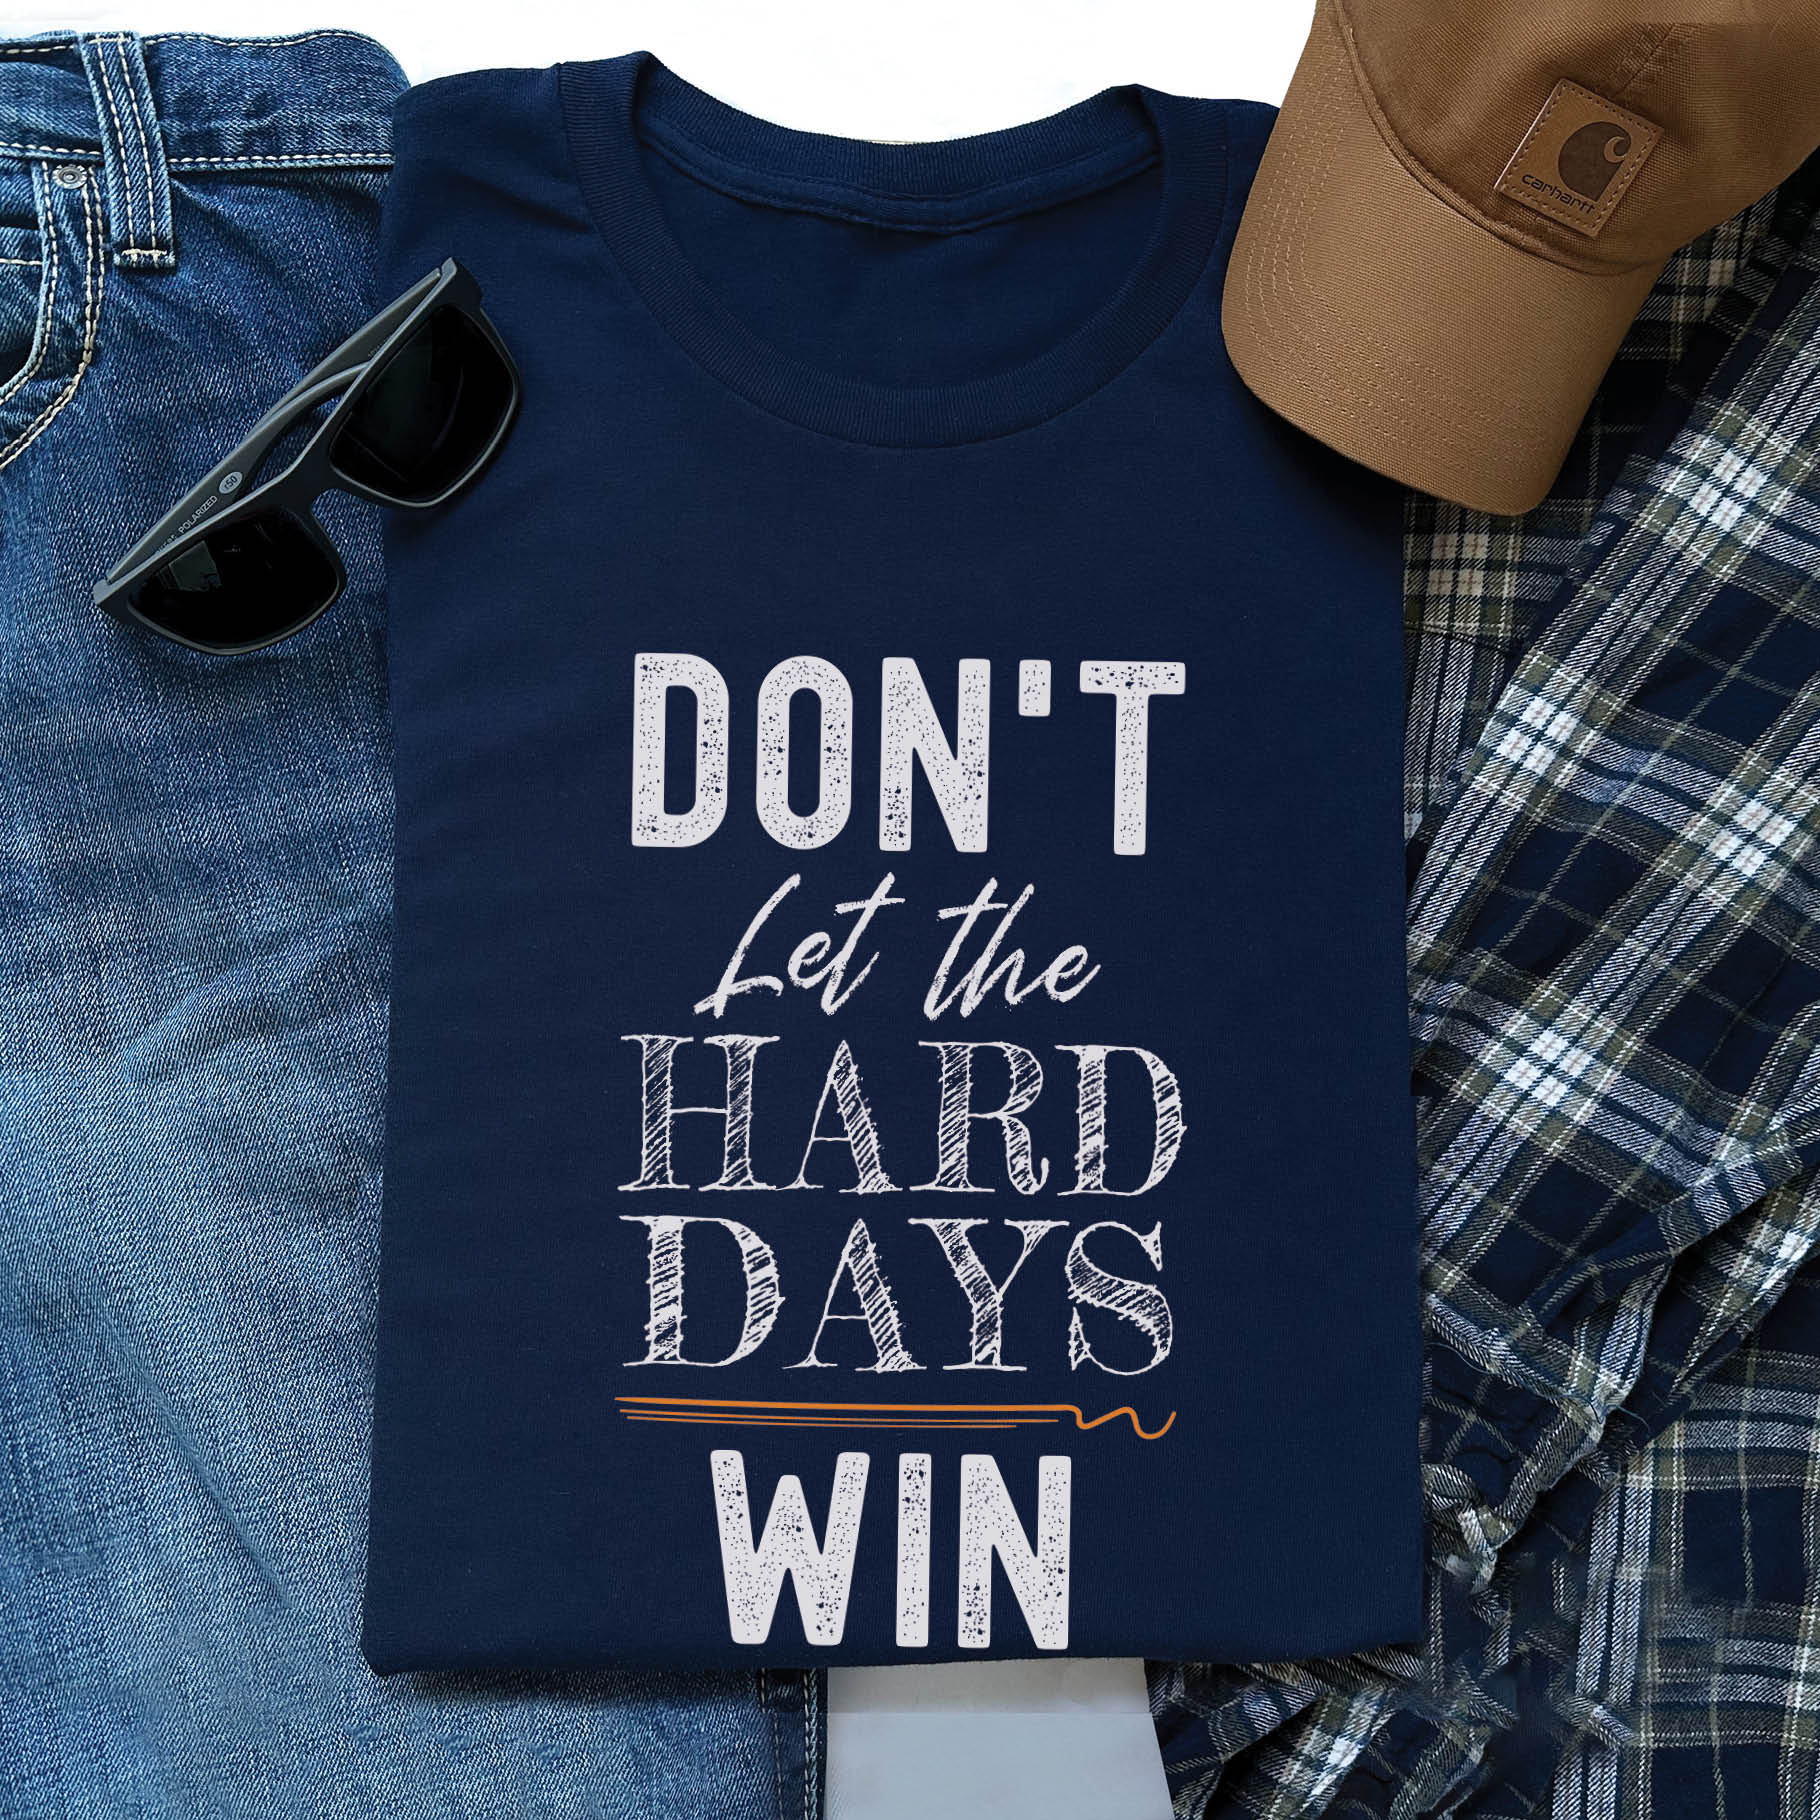 Navy blue men's unisex Christian t-shirt with a bold typography design that says, "Don't Let The Hard Days Win" printed on the front in white and orange